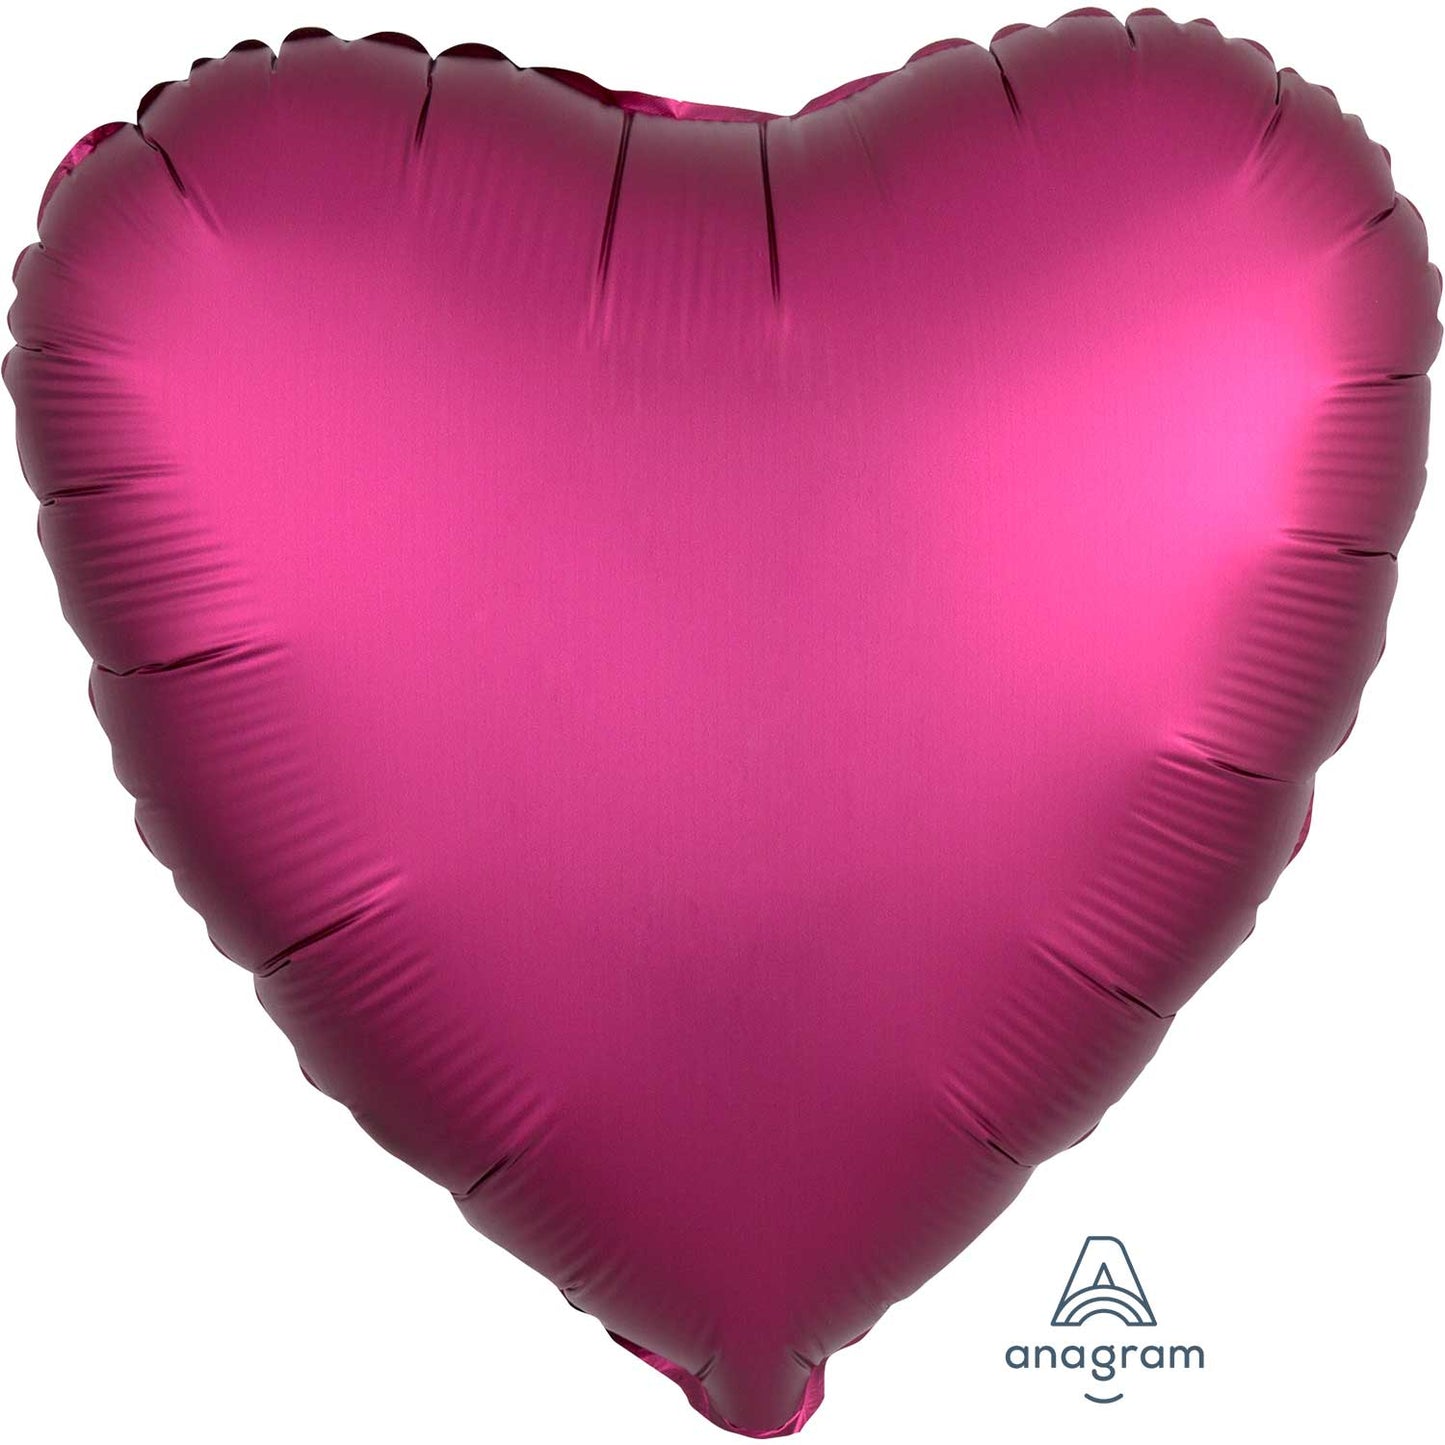 Anagram Pomegranate Heart Satin Luxe Standard HX UnPackaged Foil Balloons S15 - 1 PC